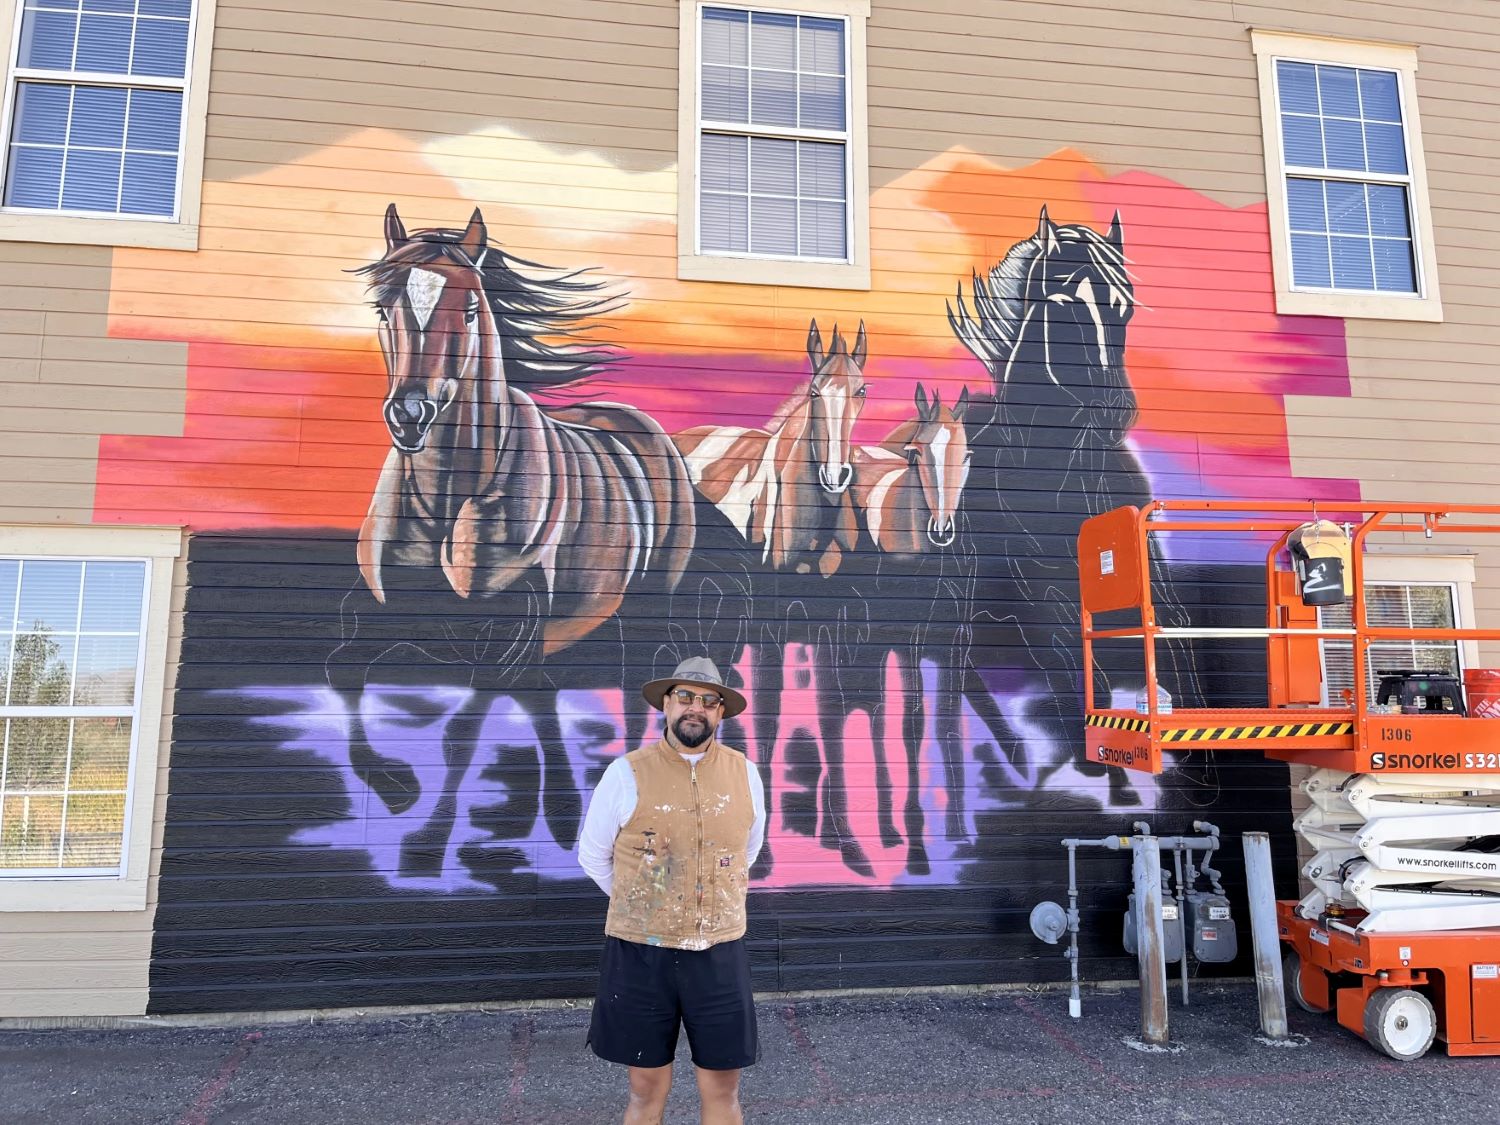 Man stands in front of mural smiling, the mural shows horses emerging in vibrant color